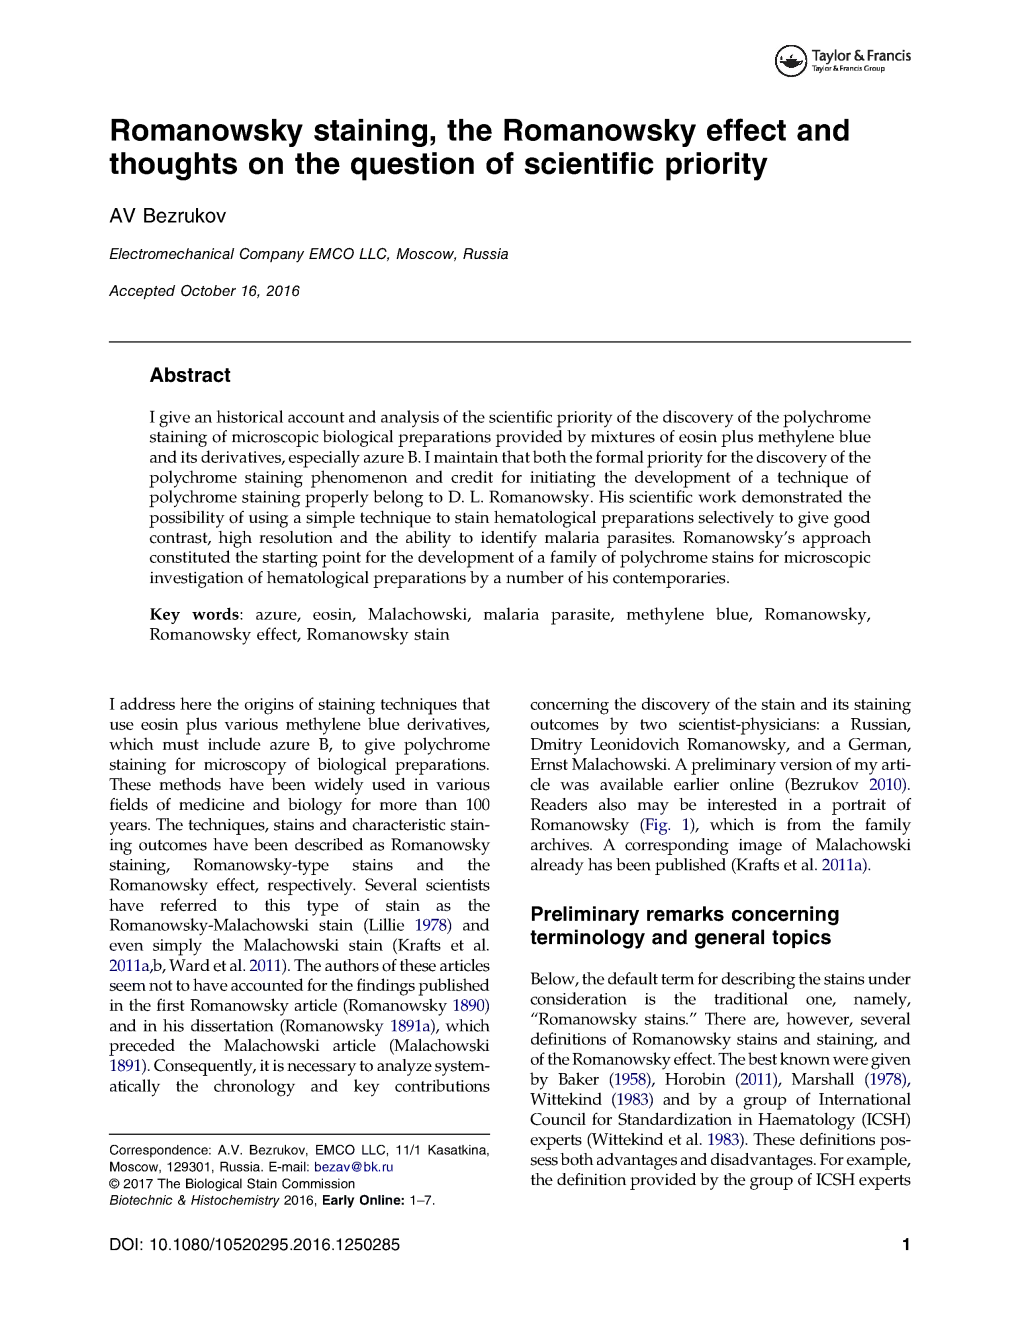 Romanowsky Staining, the Romanowsky Effect and Thoughts on the Question of Scientific Priority